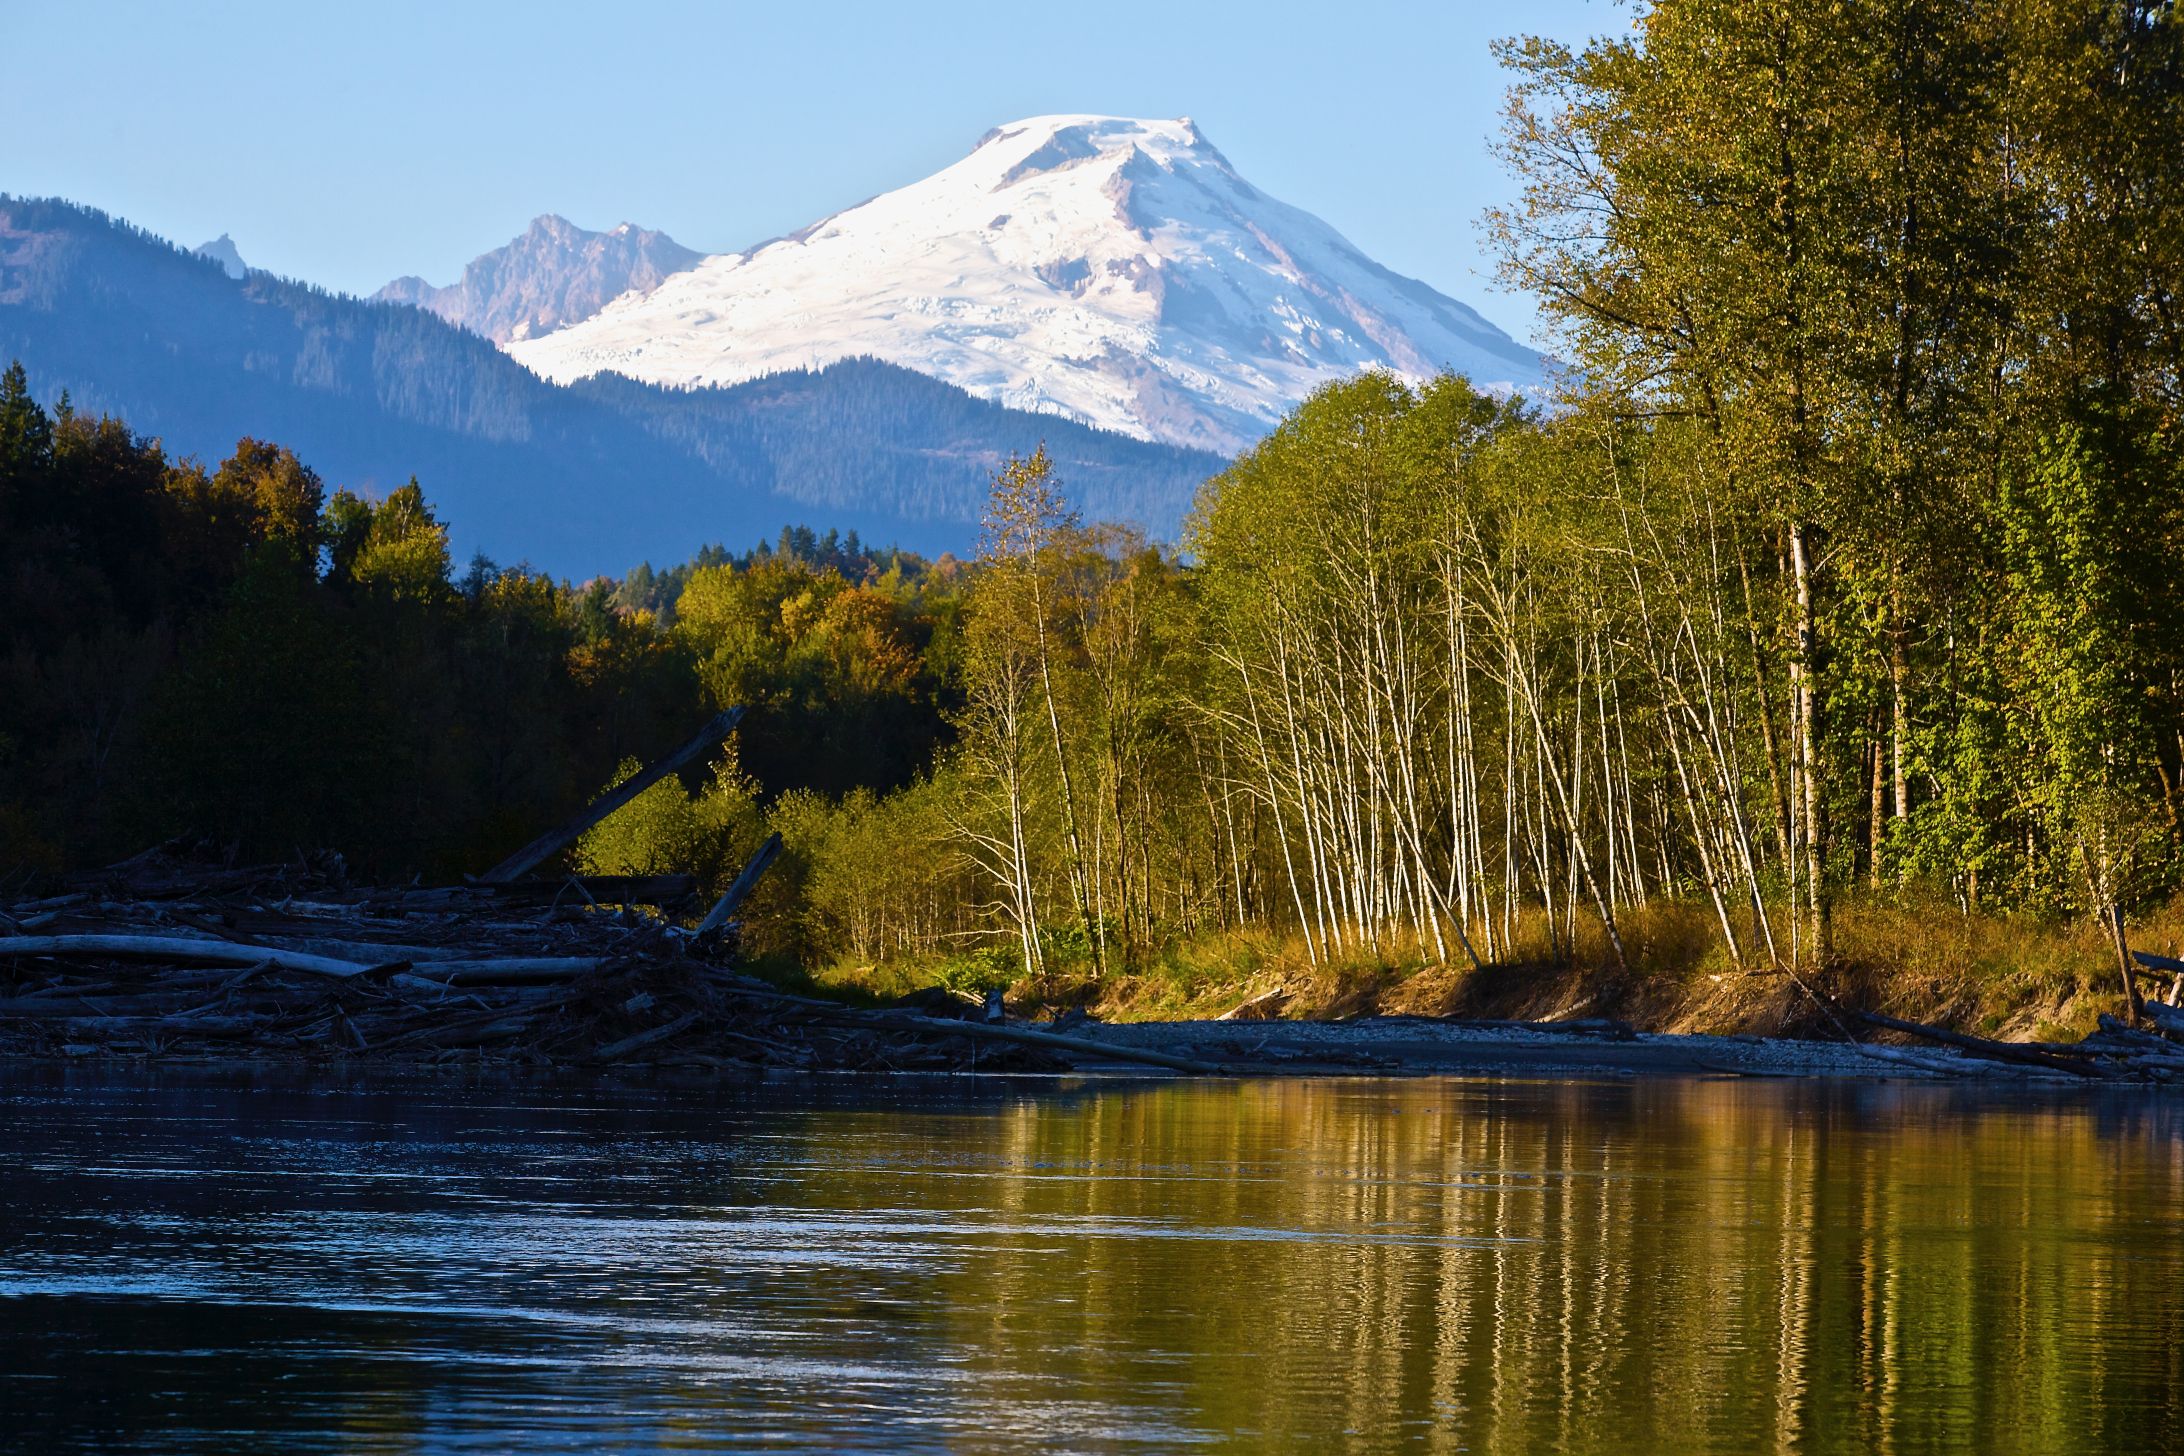 The Skagit River with Mt. Baker in the background